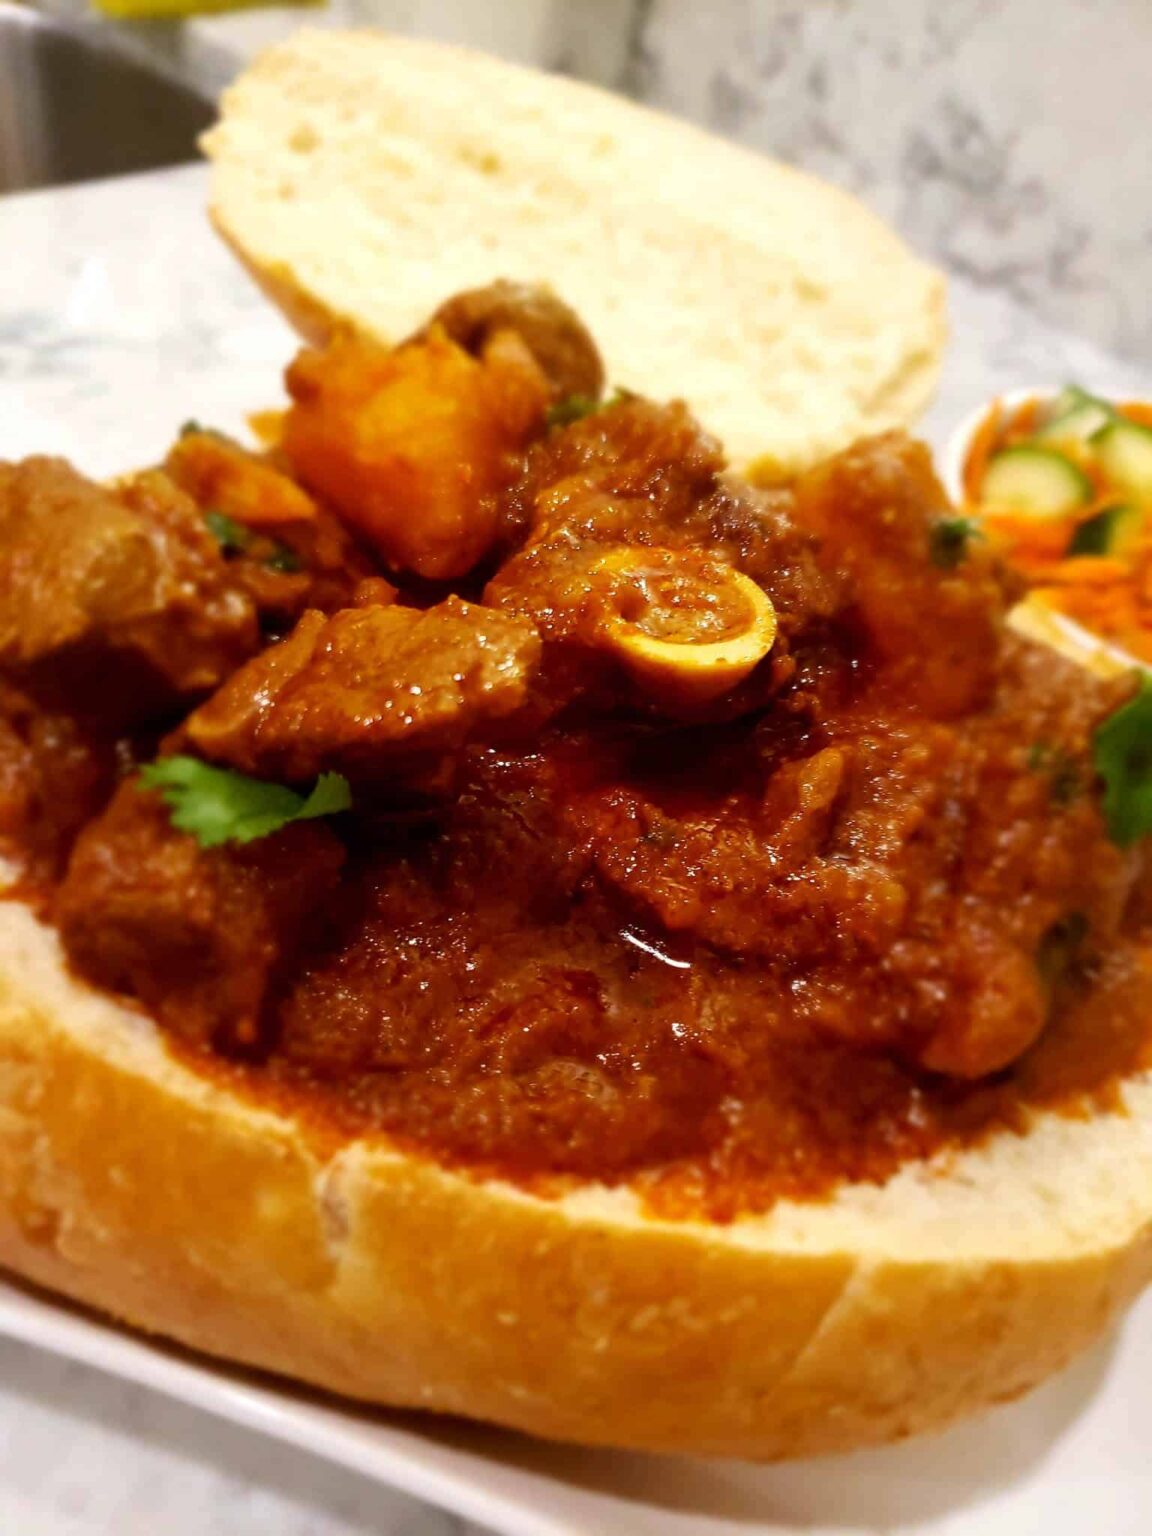 Vanessa's Incredible Mutton Curry on Sourdough - Durban Curry Recipes